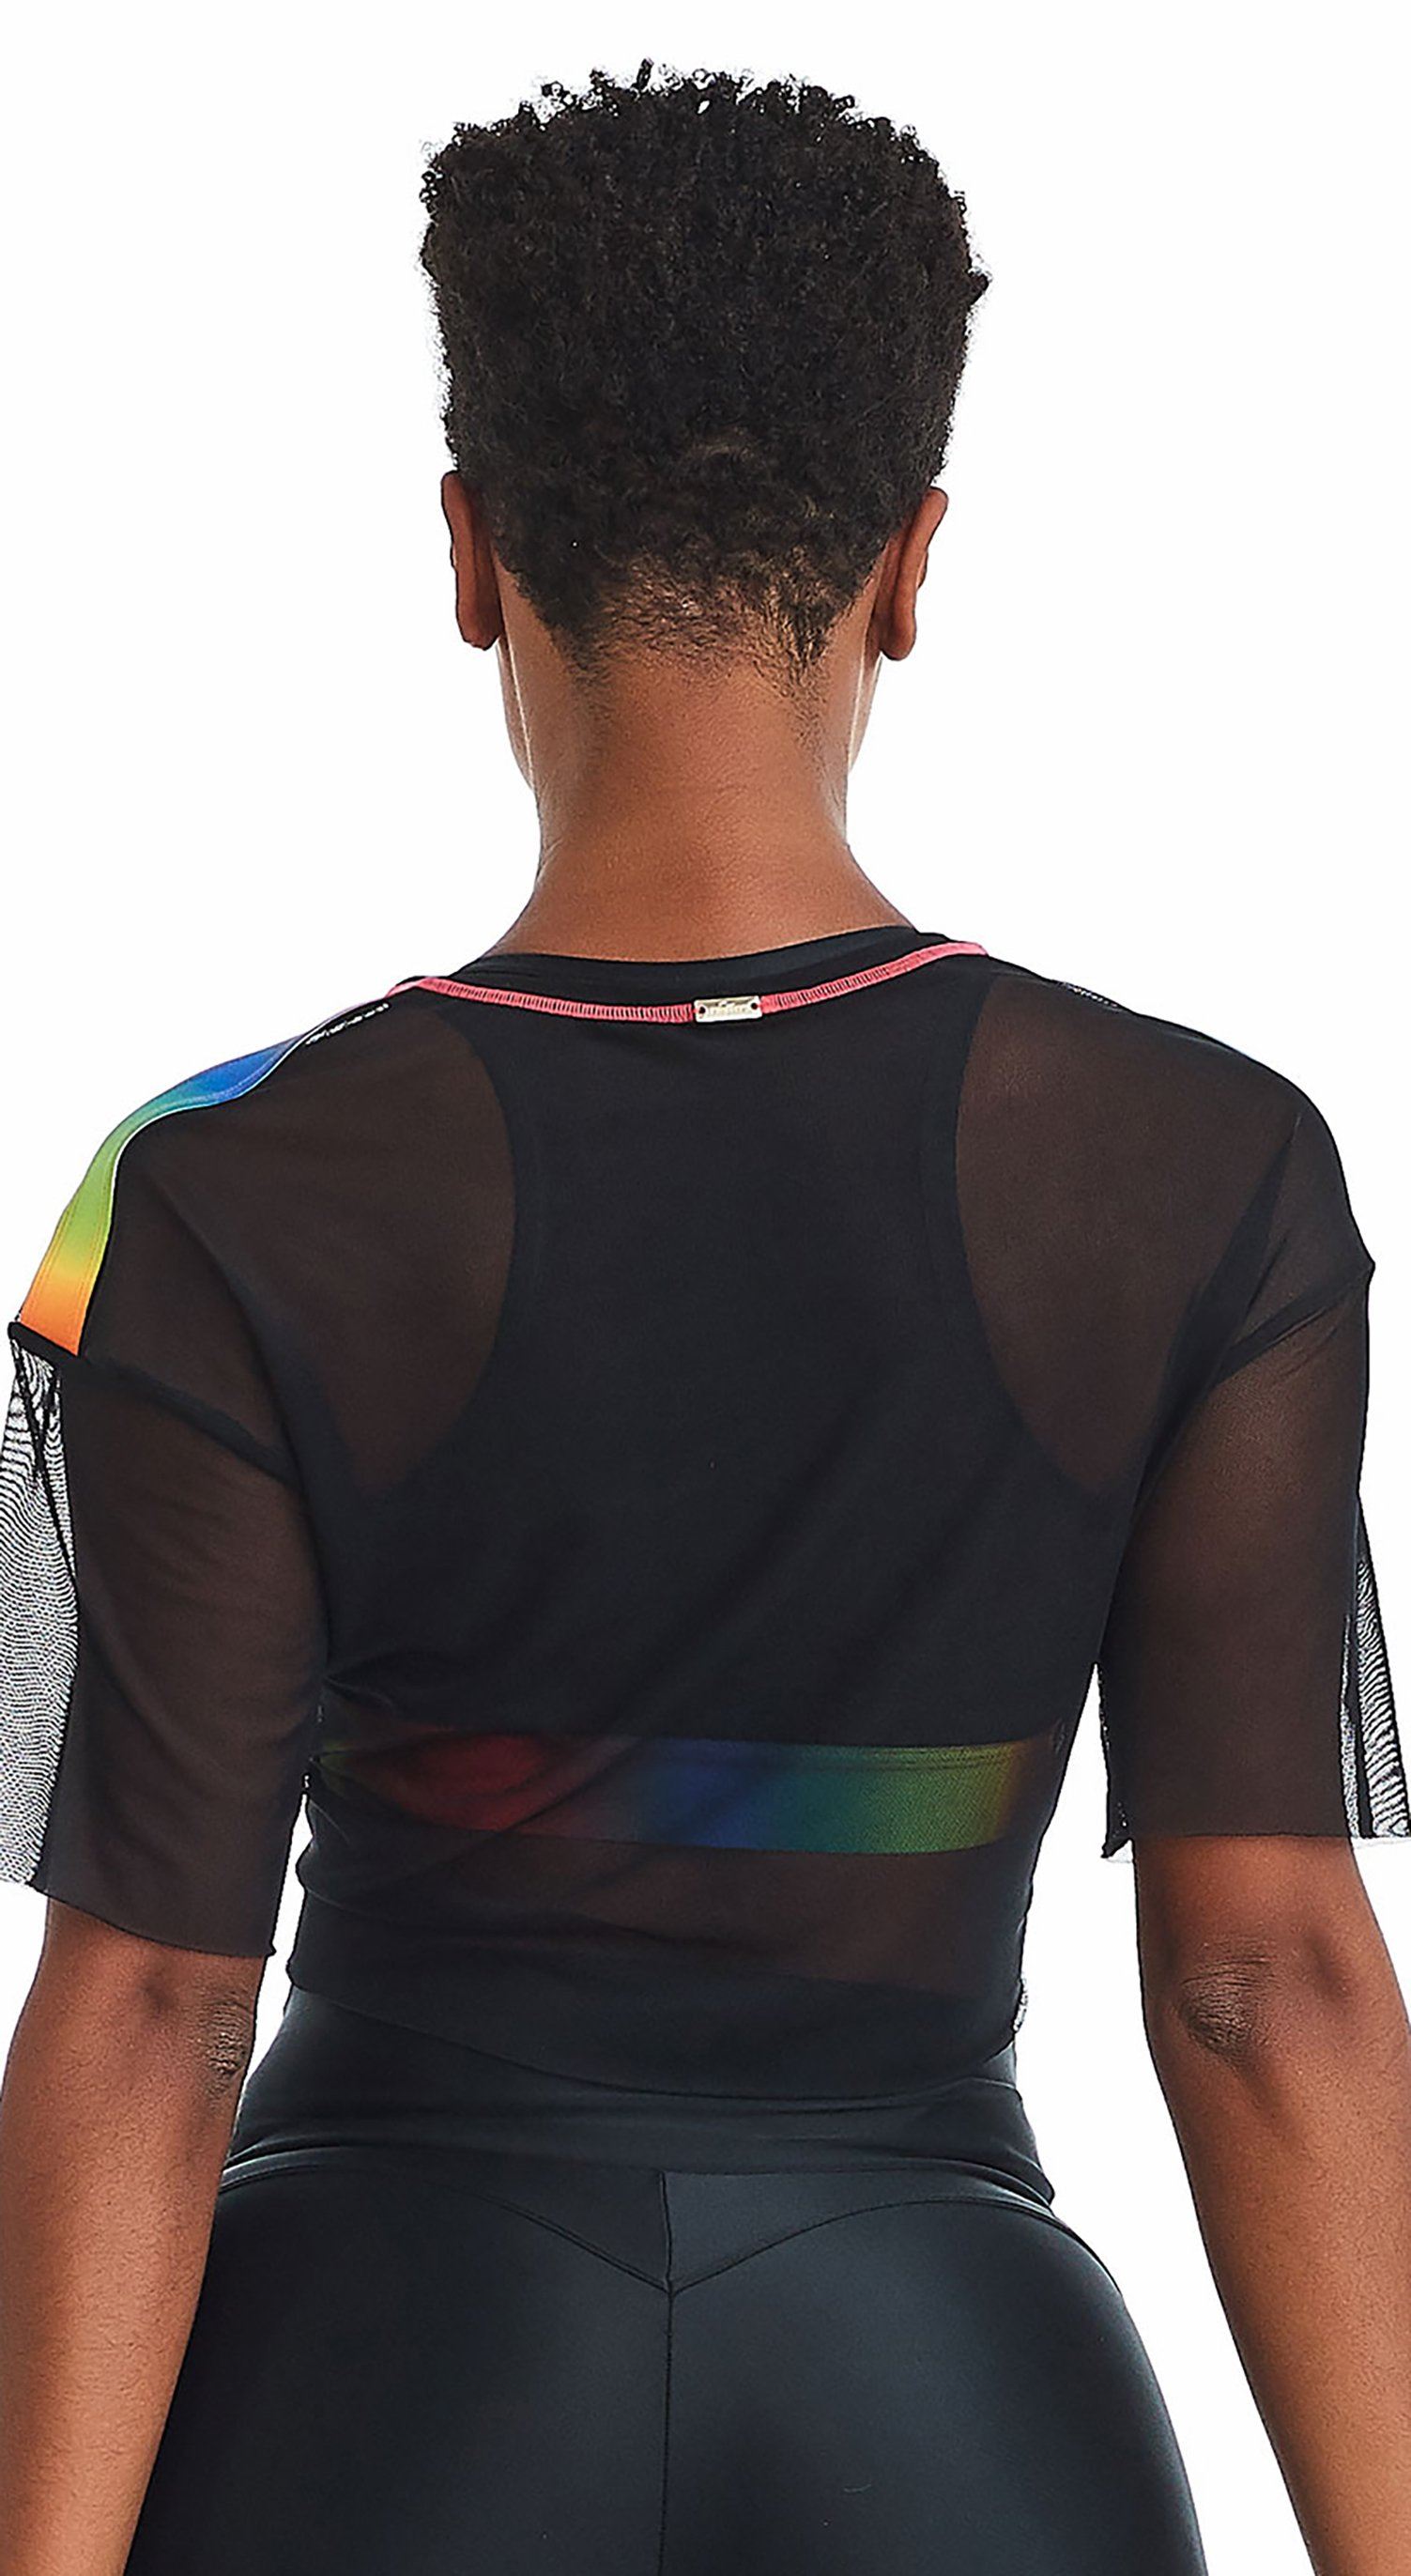 Colorful Cropped Top - Black